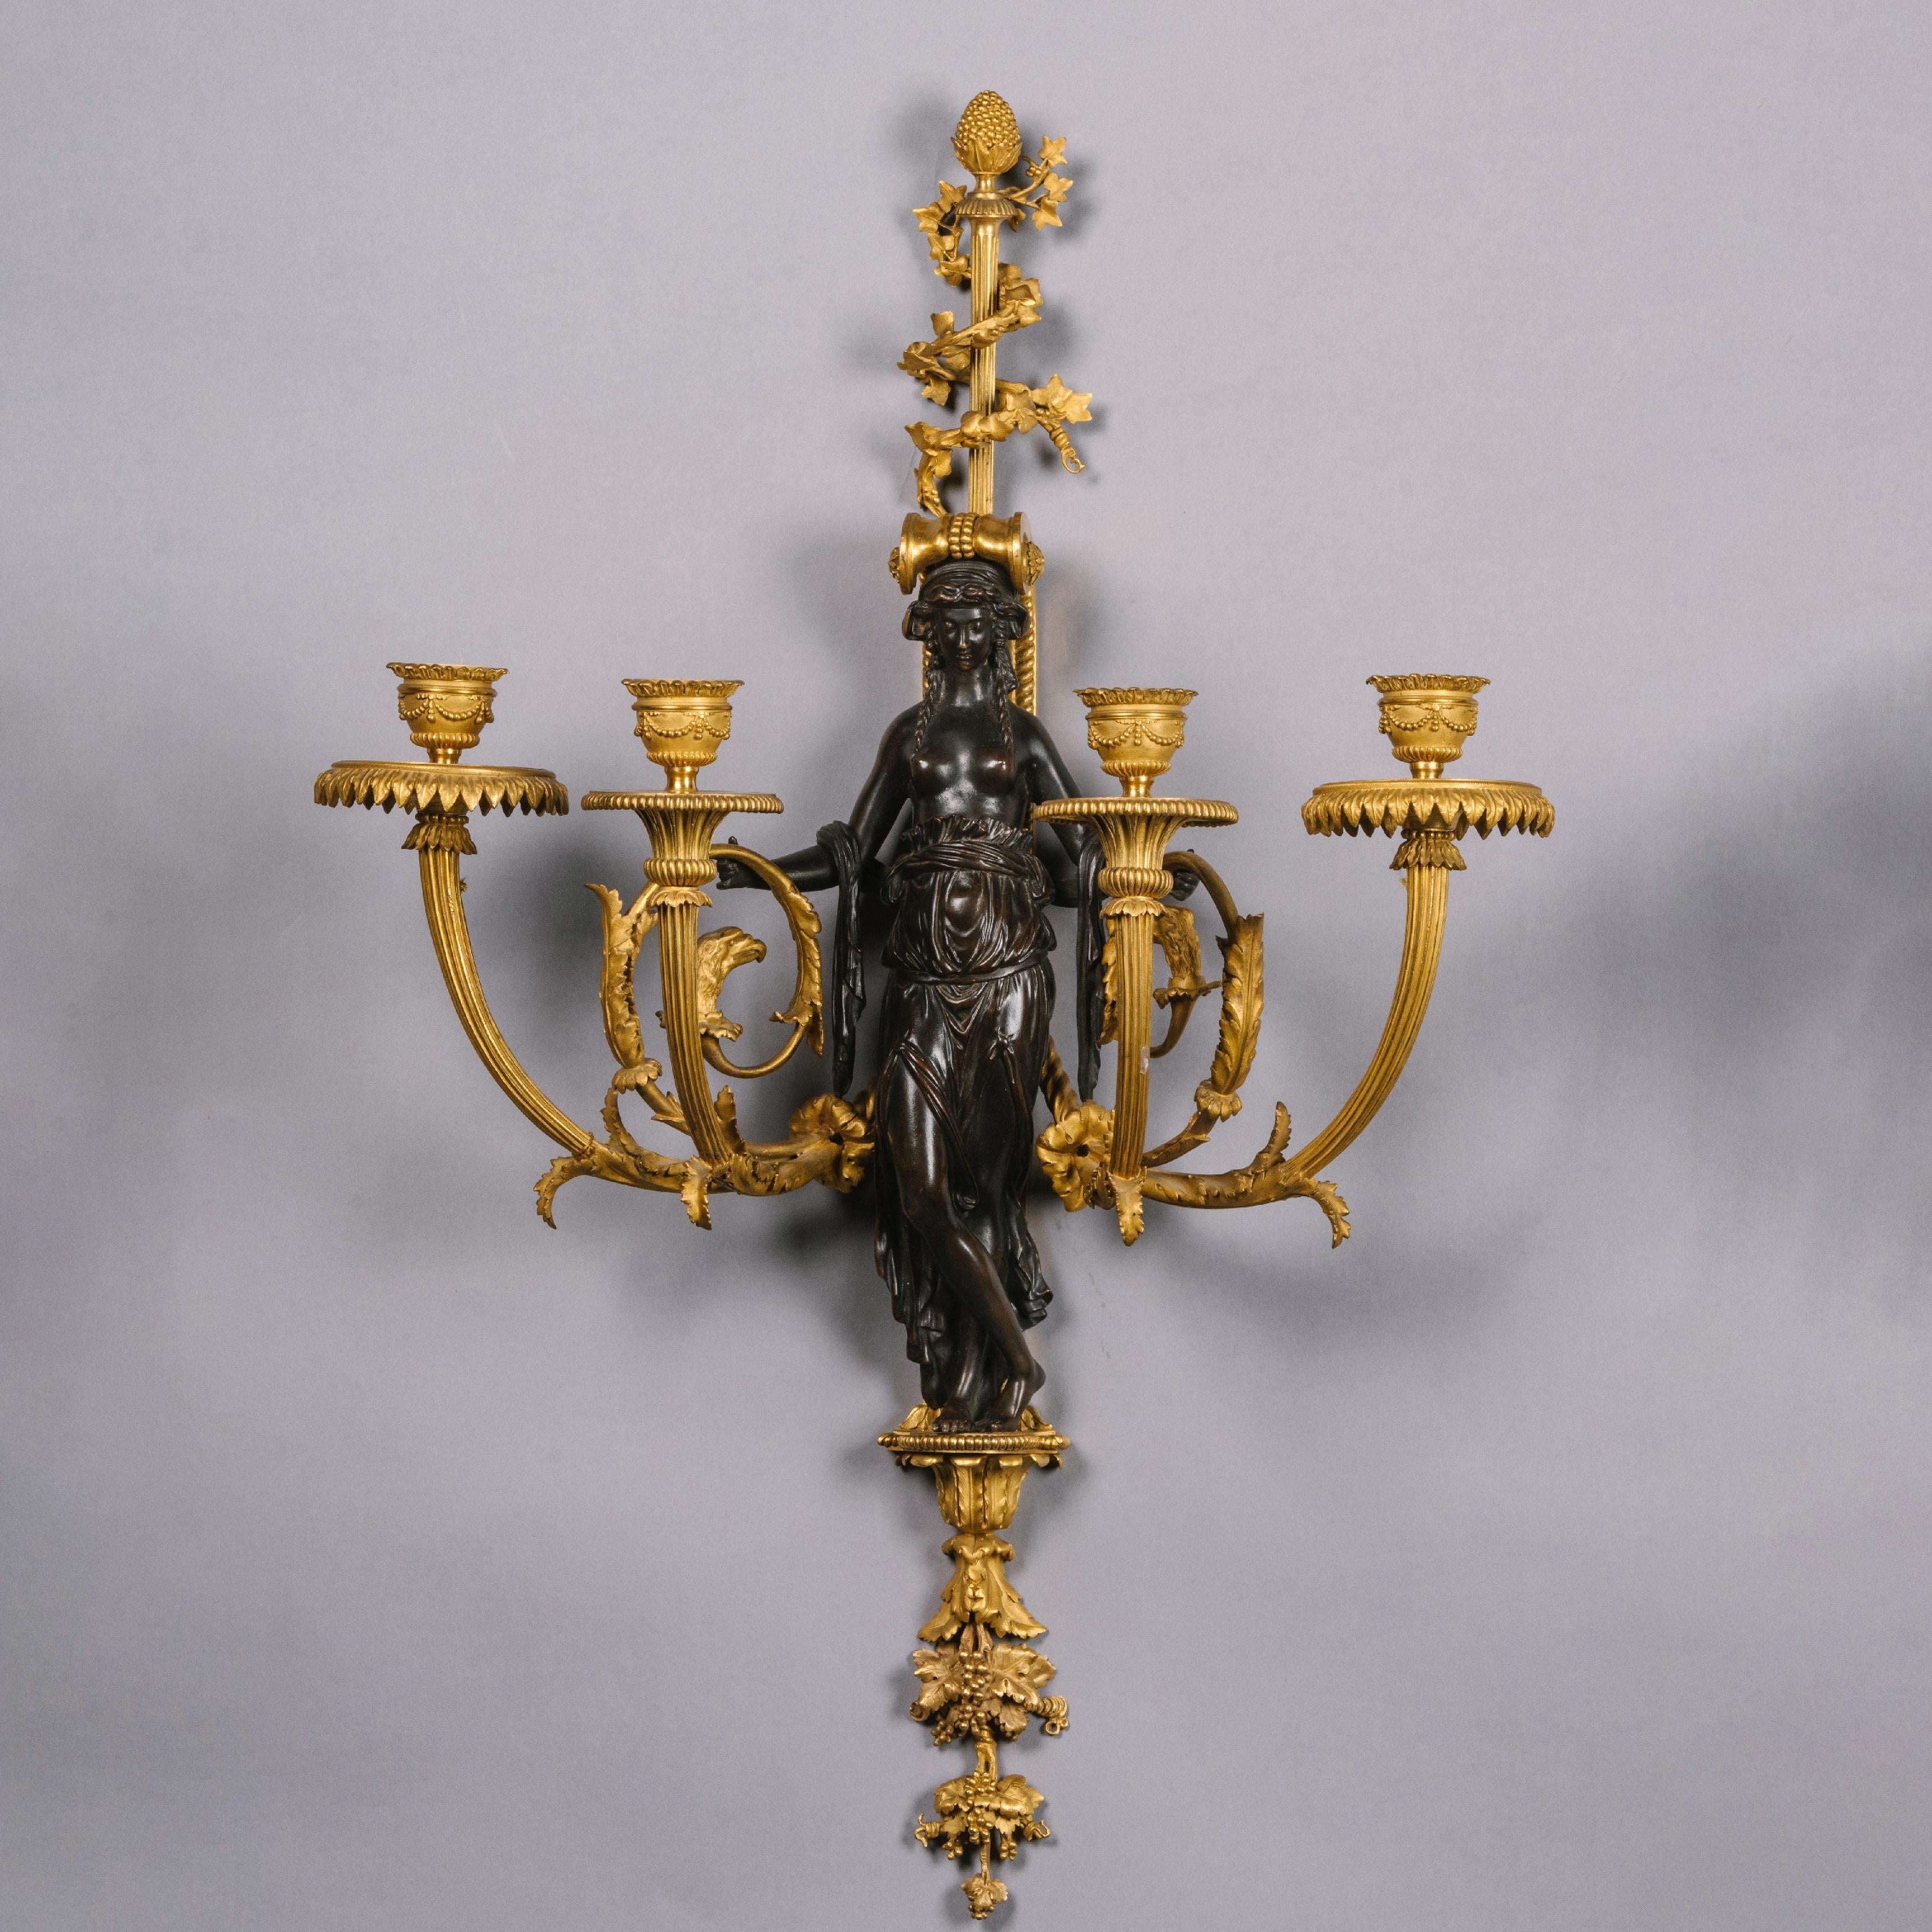 A Fine Pair of Louis XVI Style gilt and patinated bronze four-light wall-appliques
By Emmanuel-Alfred (dit Alfred II) Beurdeley, Paris.

Each modelled with a bare-breaded classical robed figure flanked by two pairs of scrolling branches. The